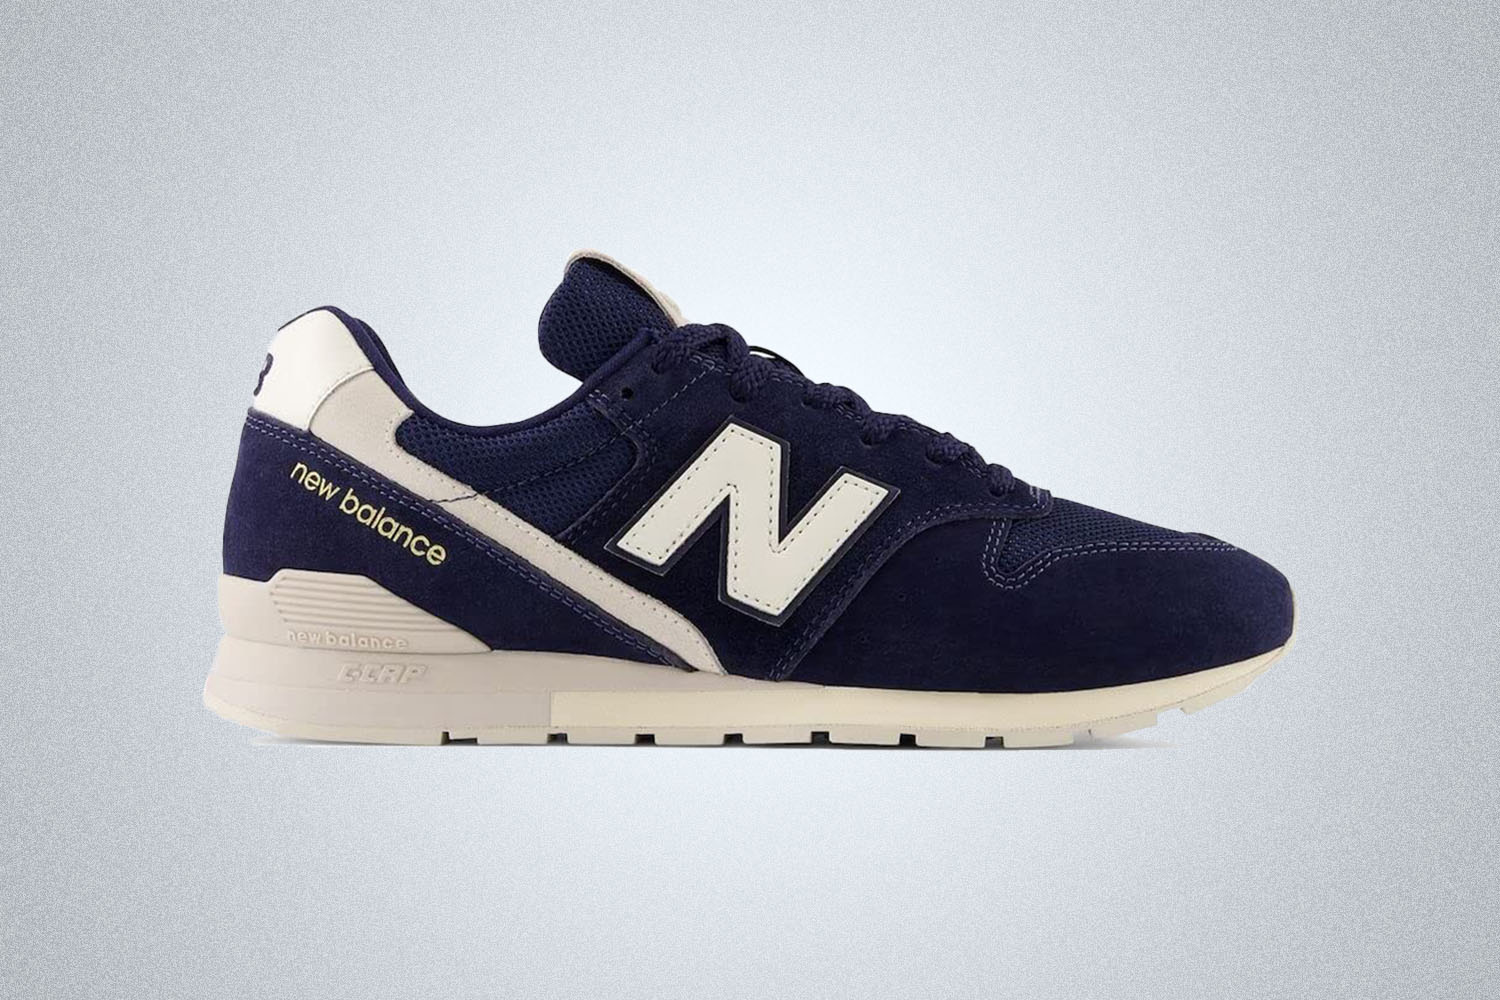 a New Balance 996 sneaker in navy on a grey background